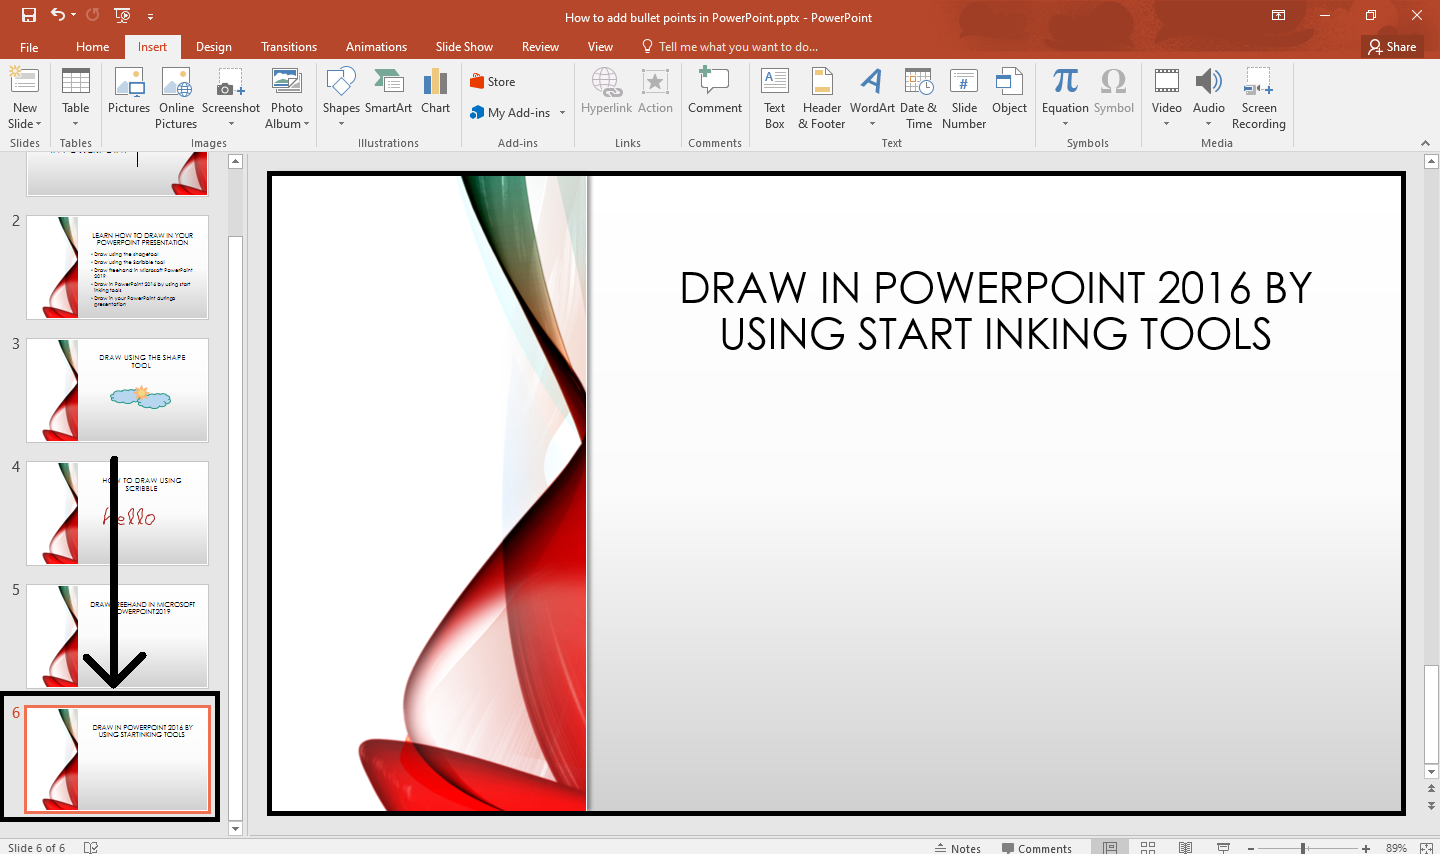 To draw in a freeform tool in PowerPoint 2016, you have to go to Review tab